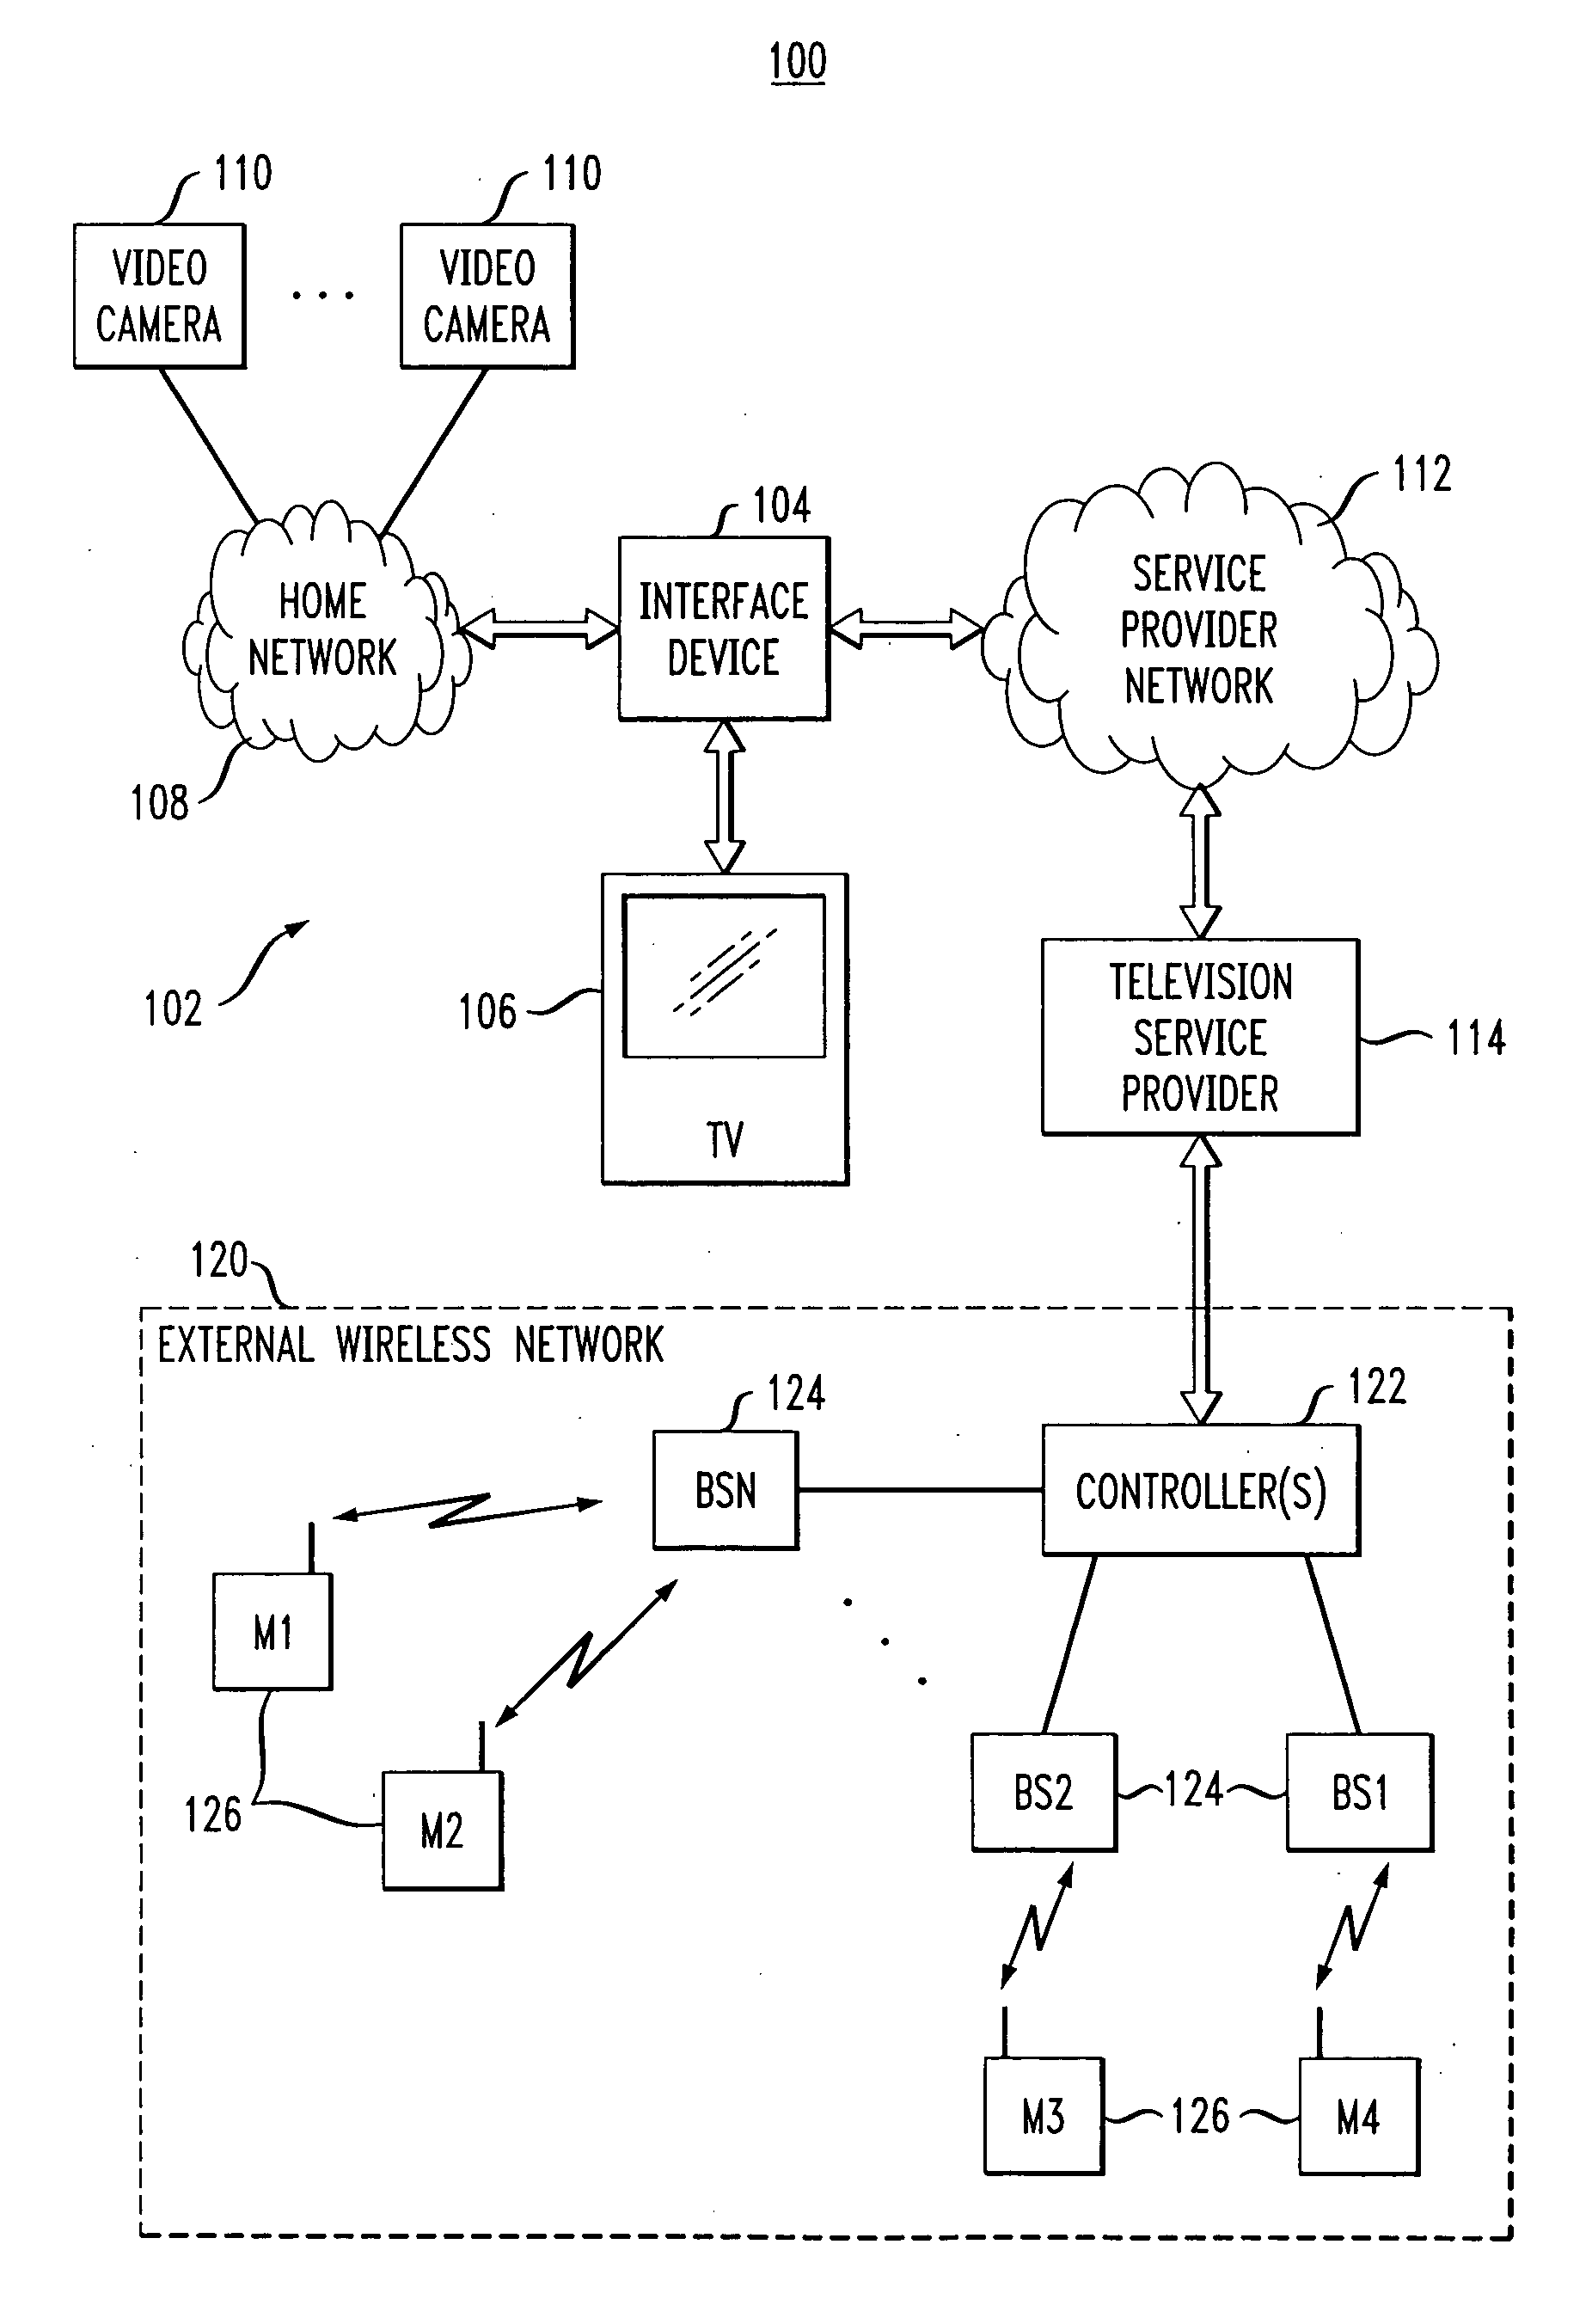 Signal distribution system with user-defined channel comprising information from an external network